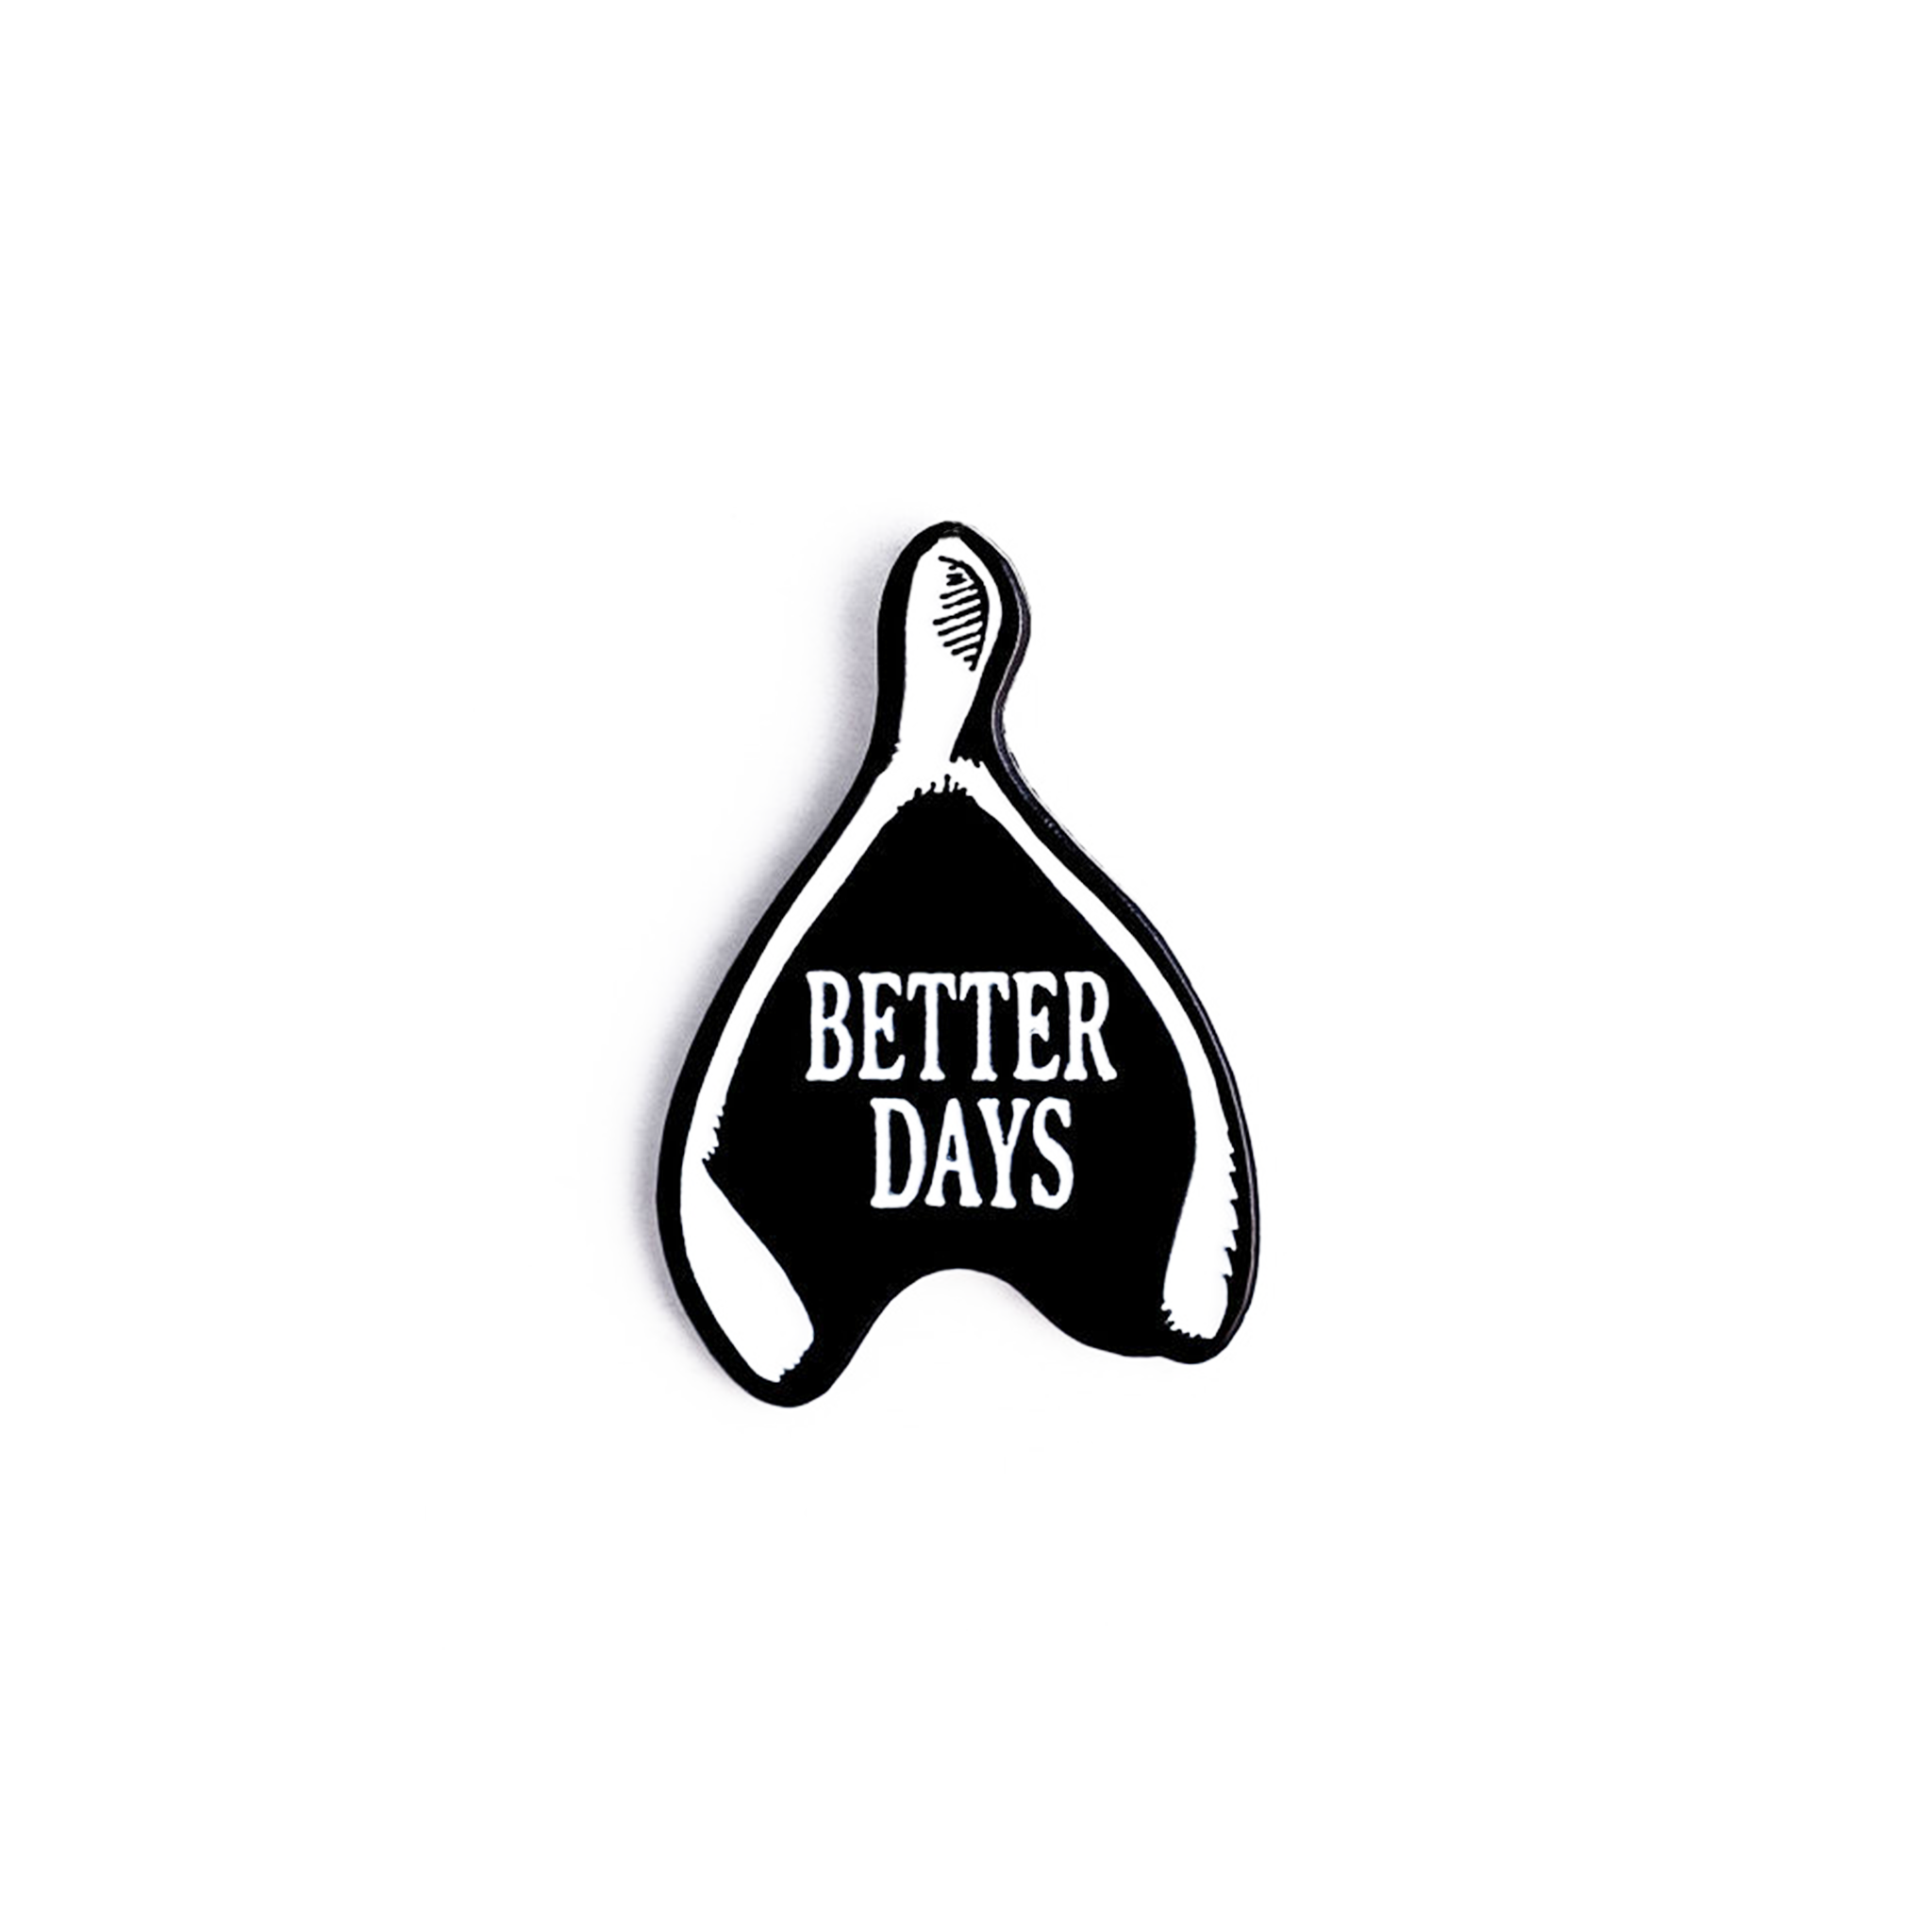 Wishing For Better Days Pin